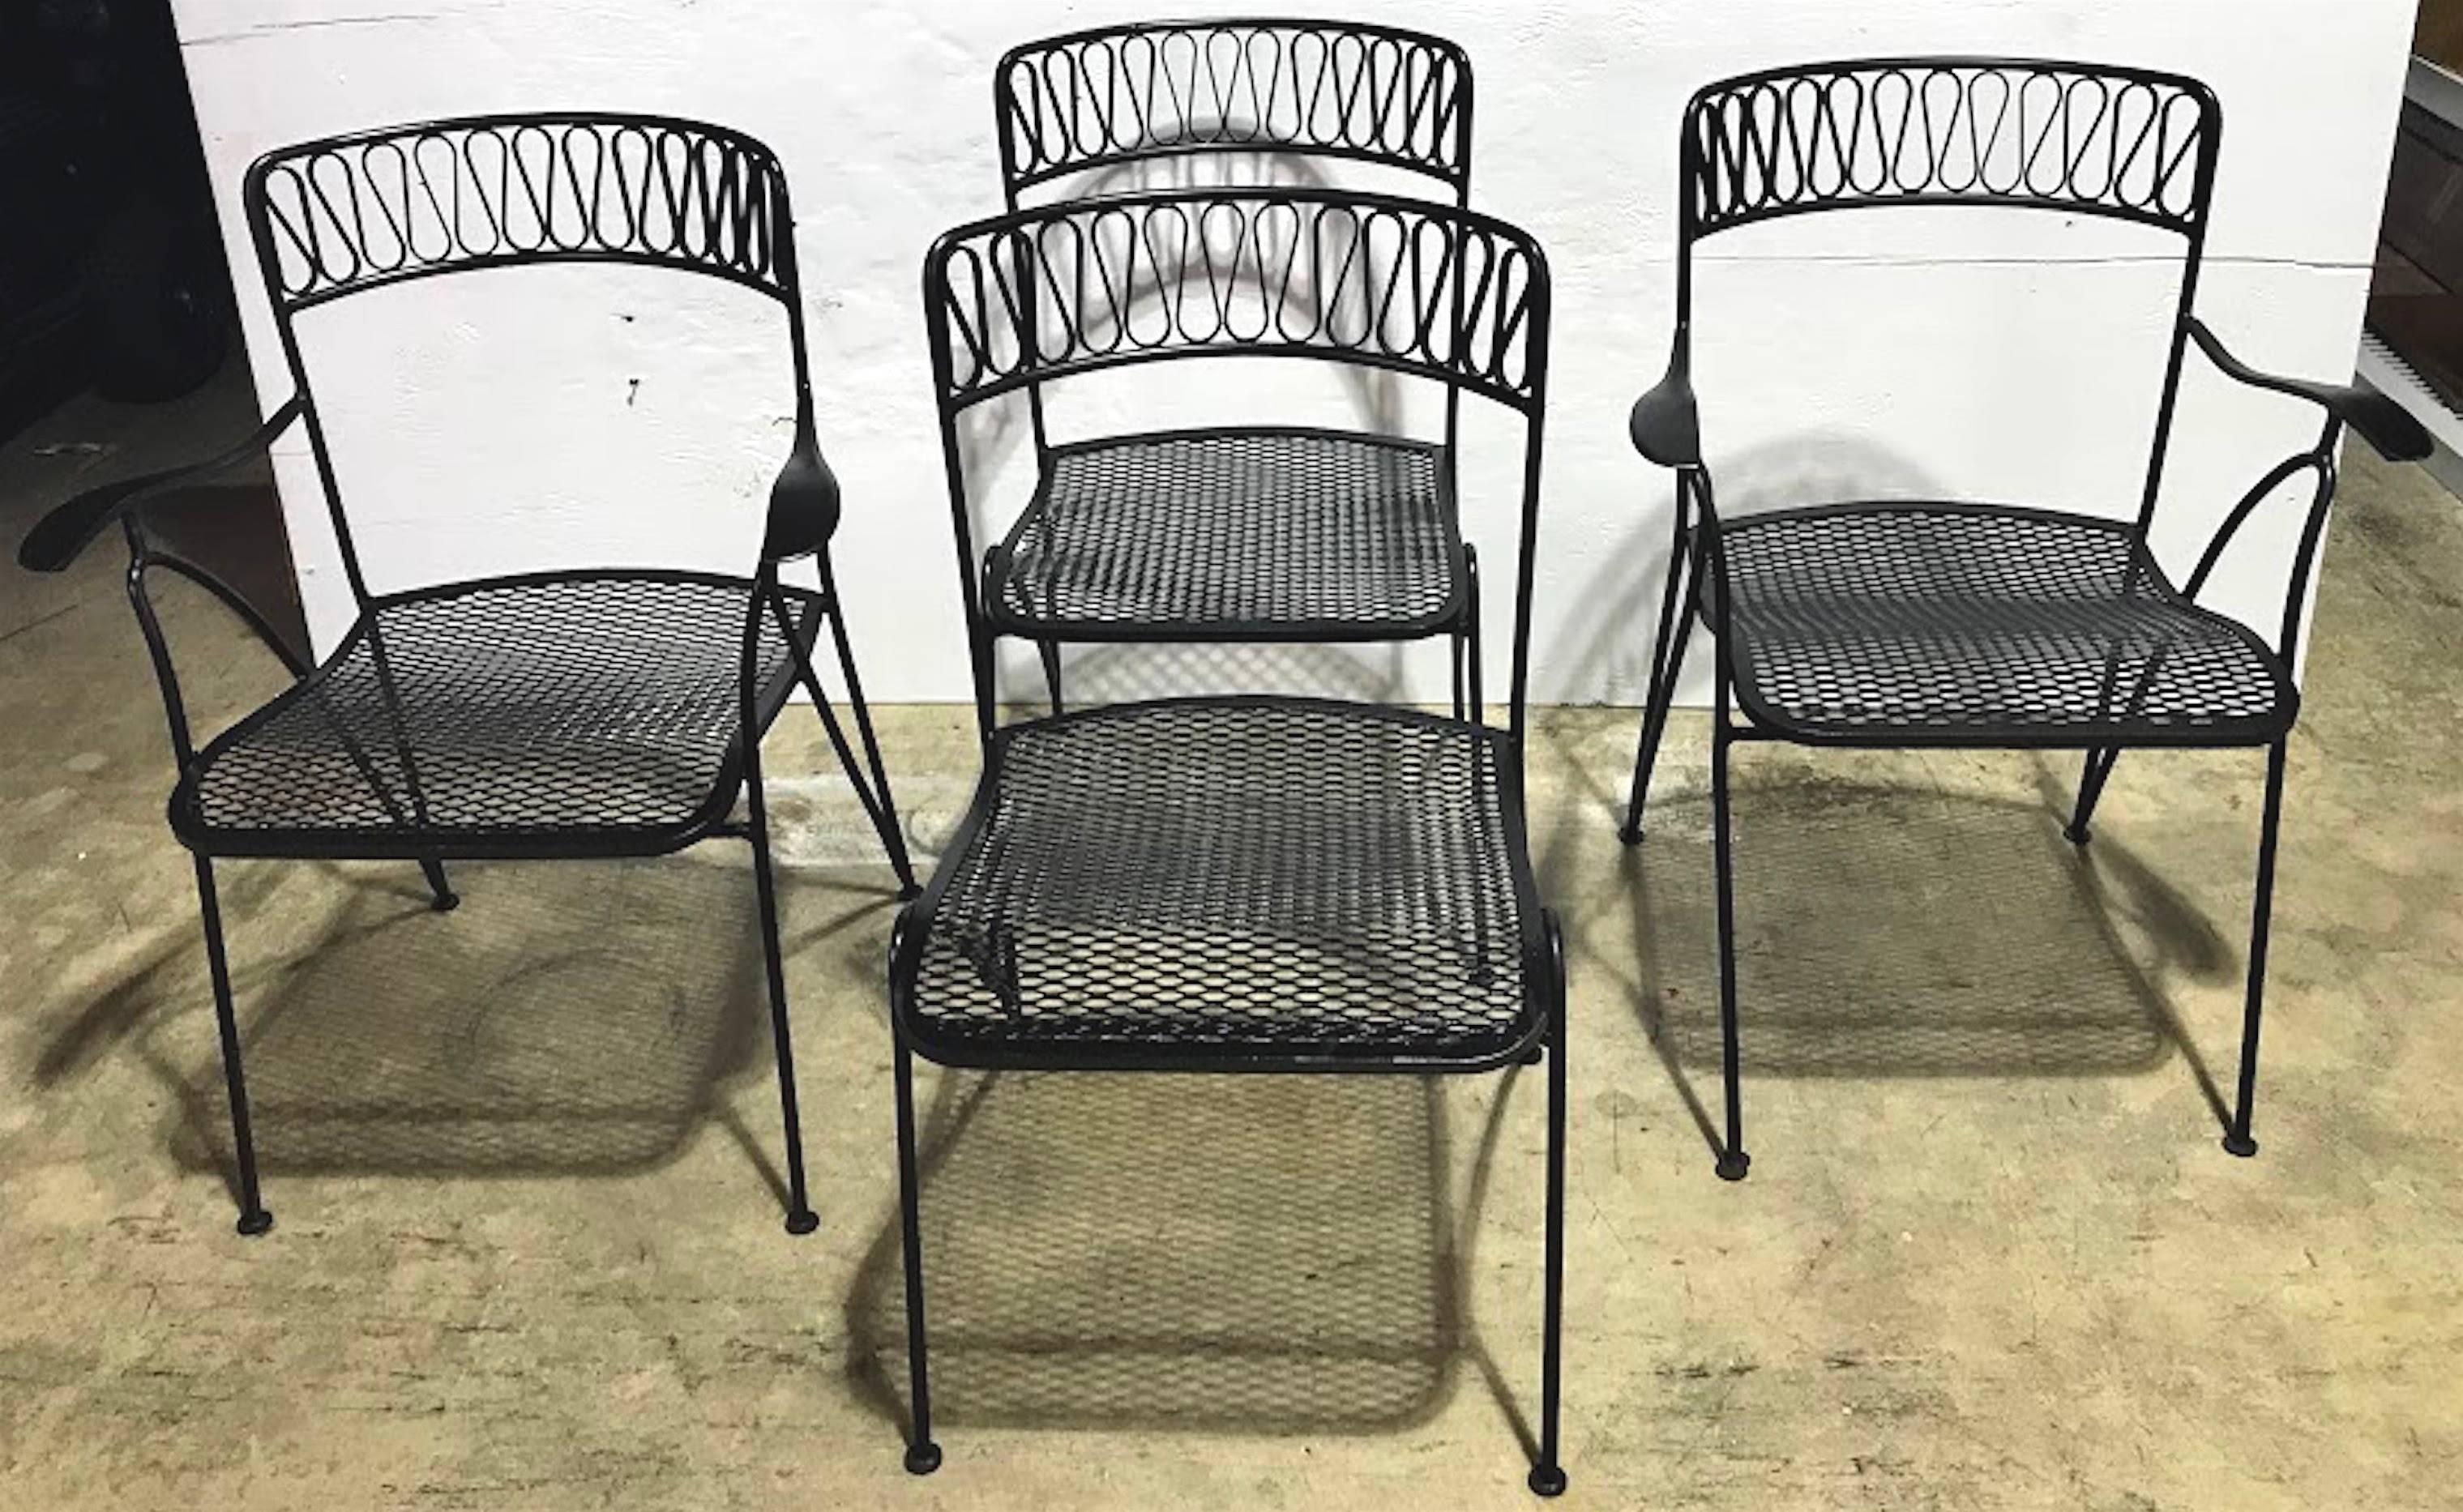 Four Salterini Ribbon Series dining chairs, by Maurizio Tempestini for Salterini, restored consisting of two armchairs and two side chairs
Armchairs measure 33